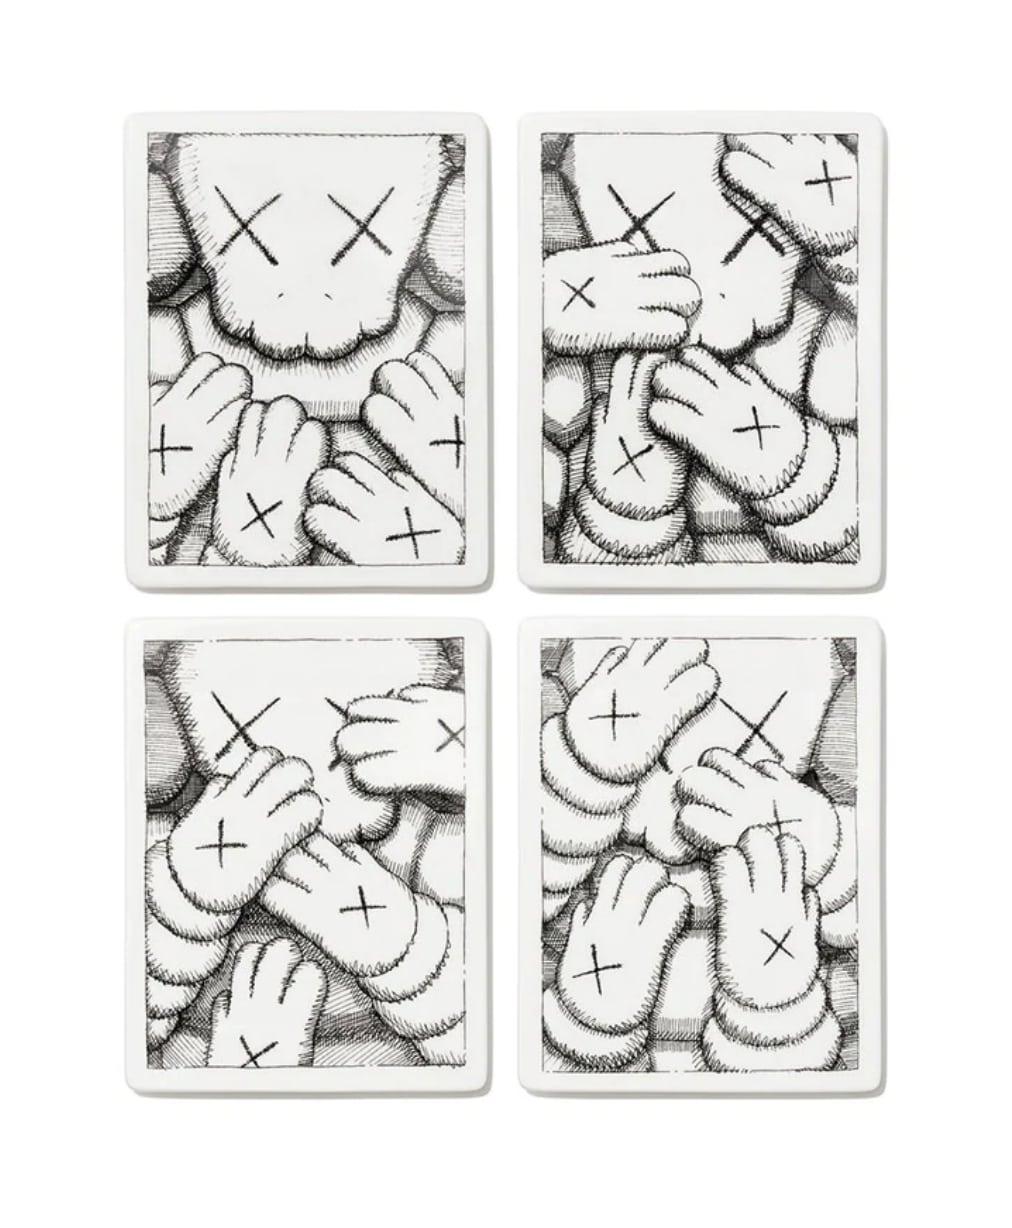 Urge plate set (complete set of 4) - Mixed Media Art by KAWS